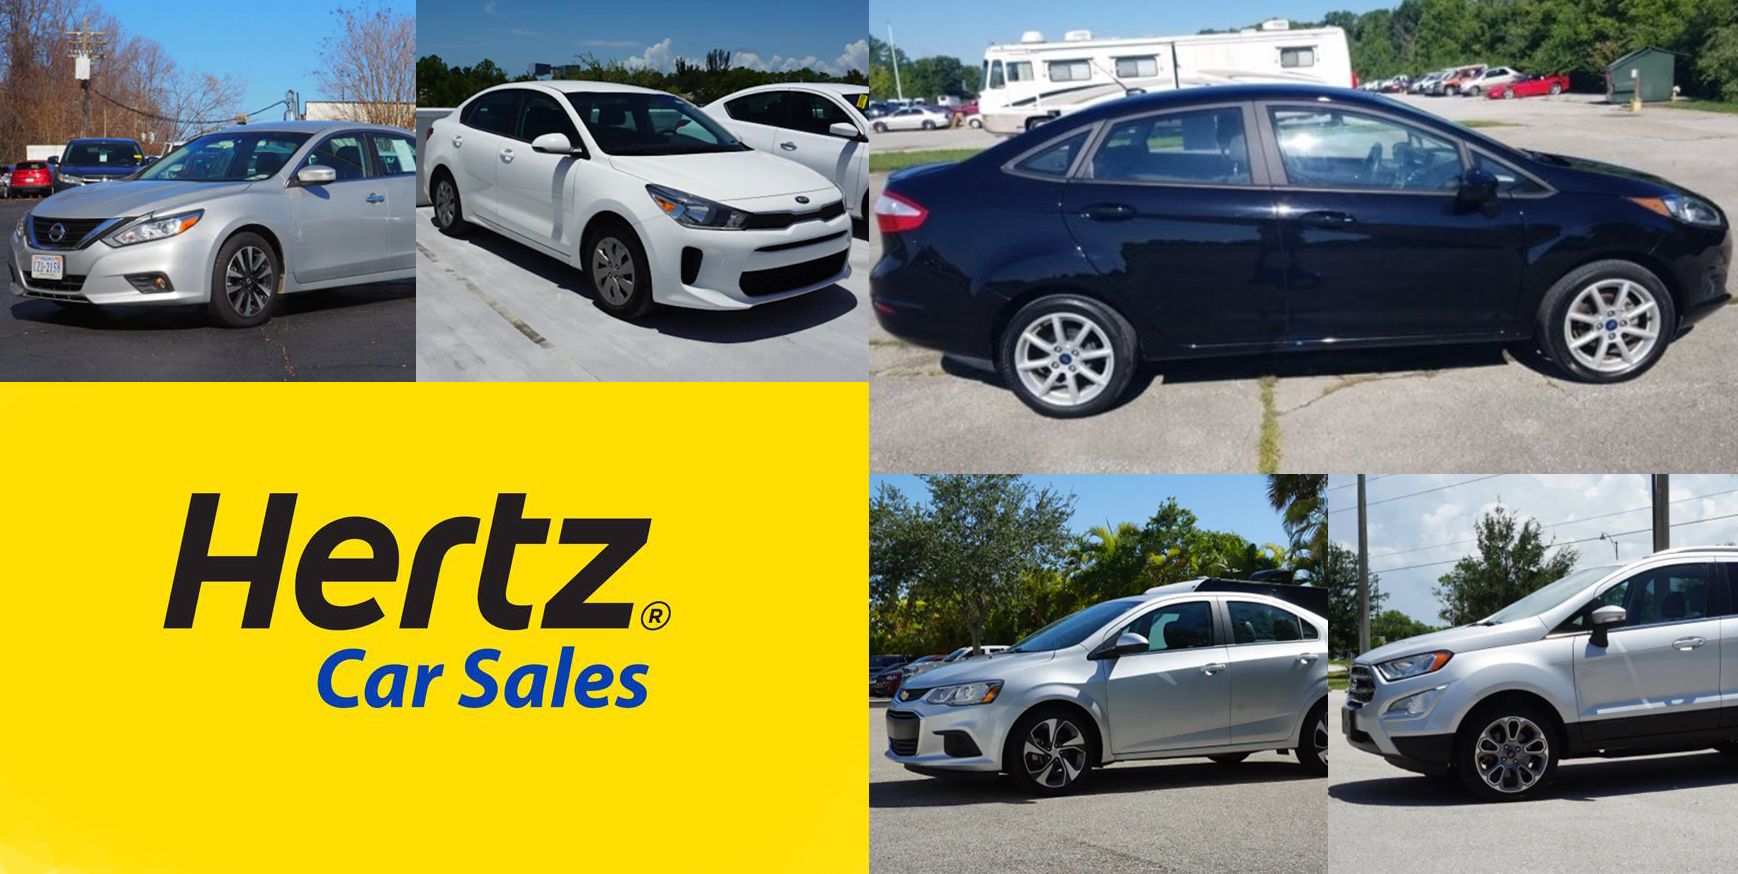 Cars You Can Buy from Hertz for $15,000 or Less